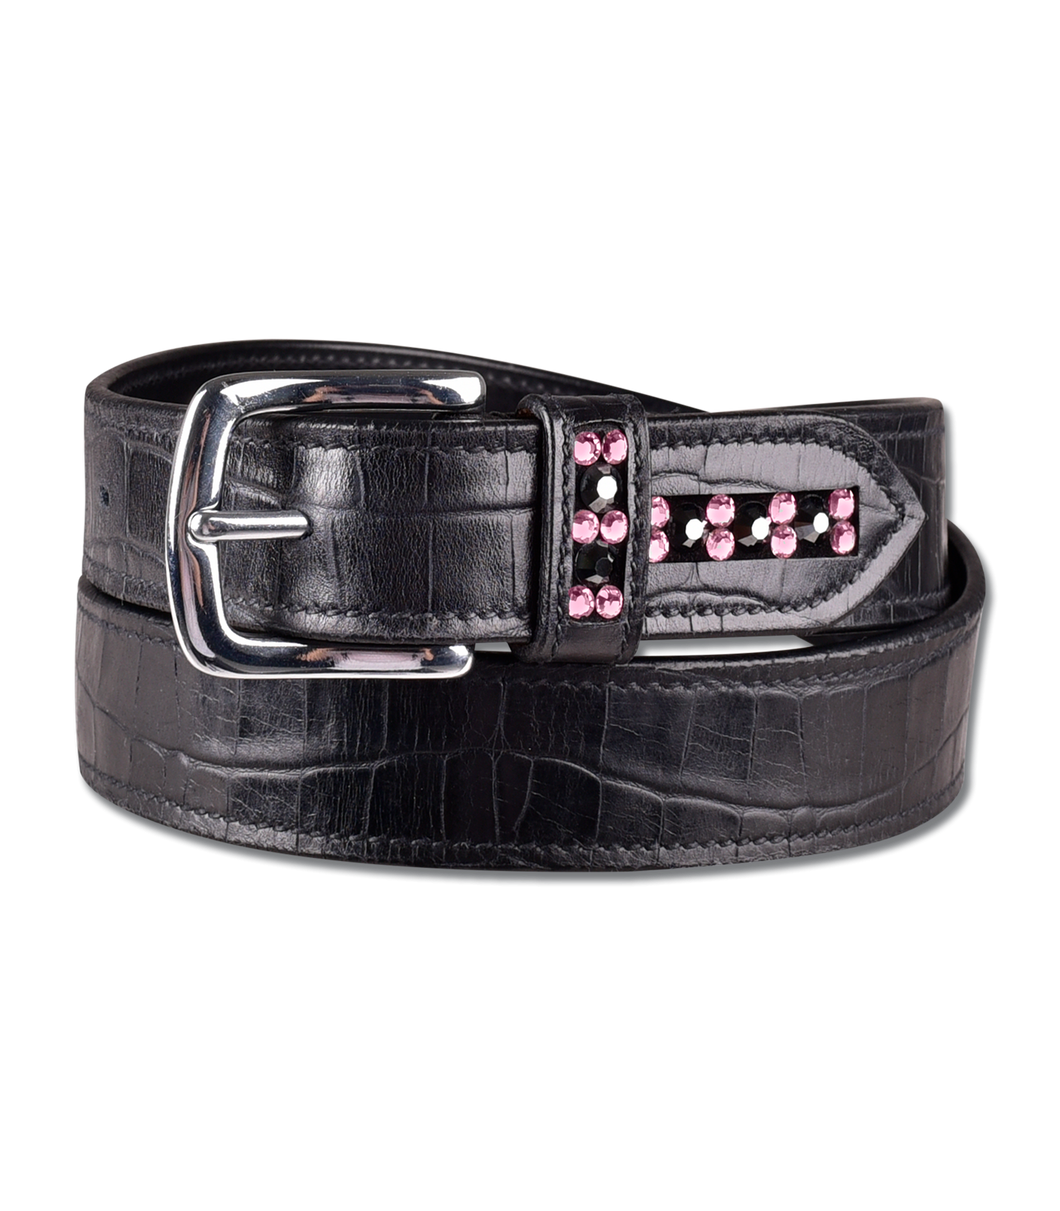 Leather belt with crystals